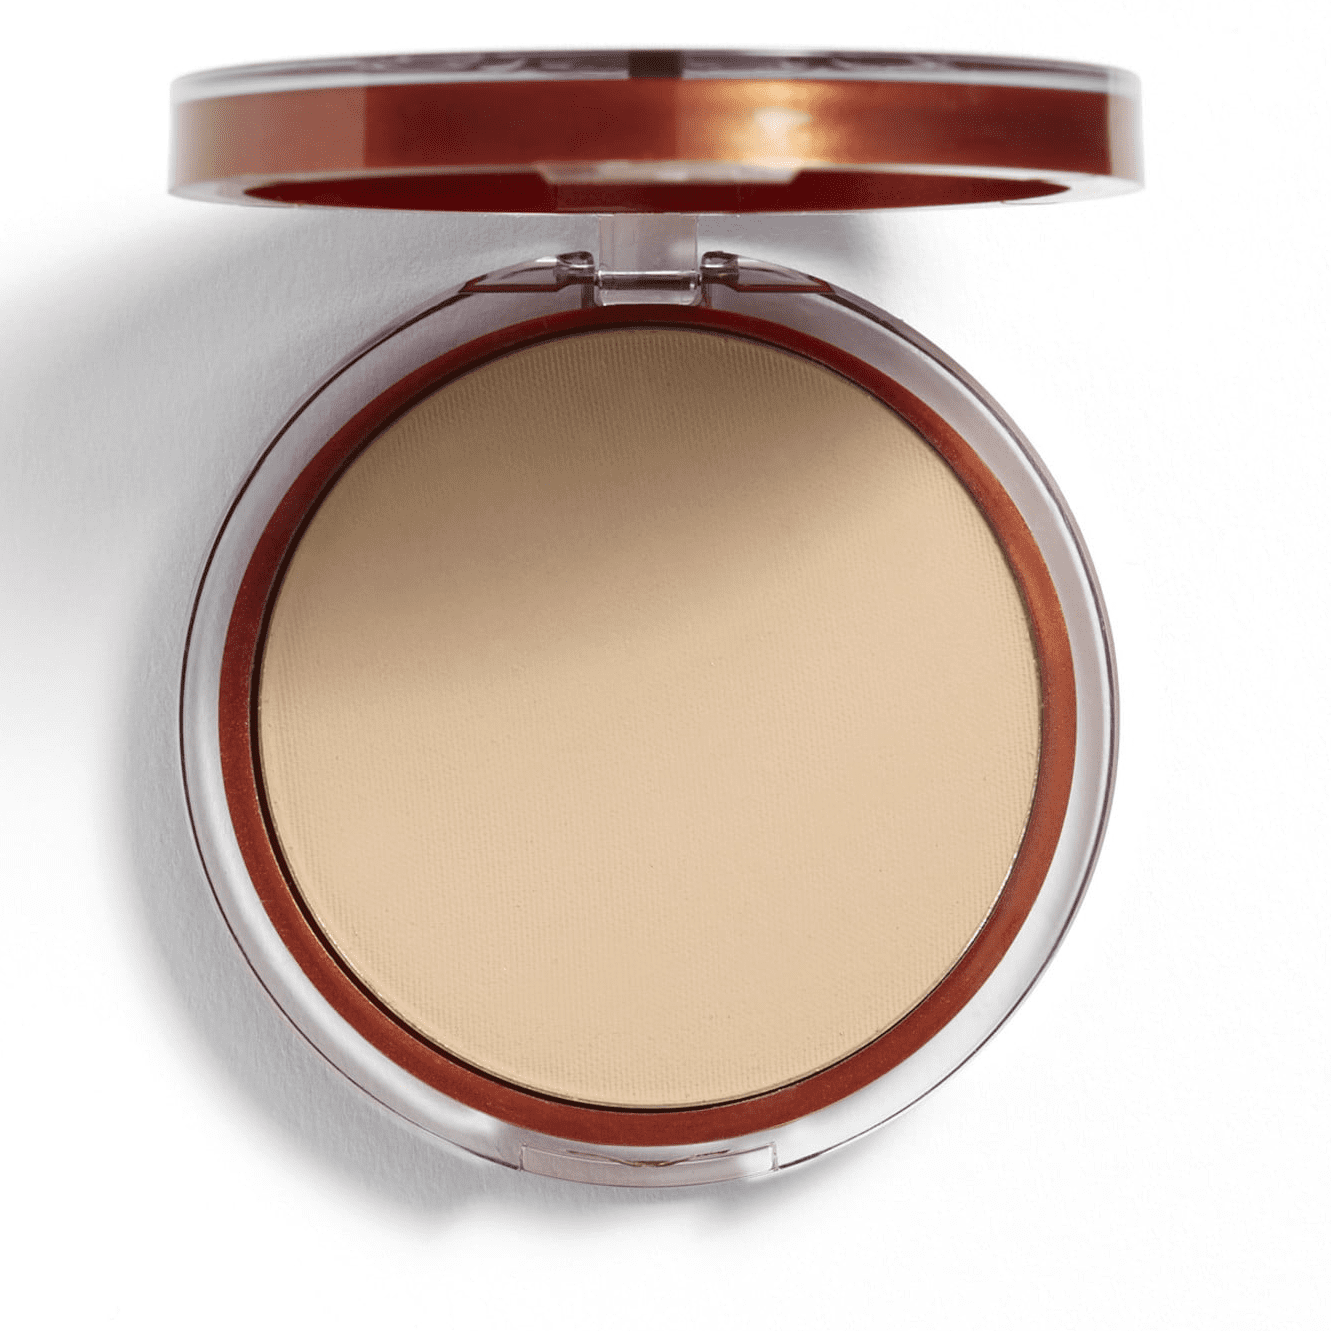 COVERGIRL Clean Pressed Powder, 125 Buff Beige, 0.39 oz, Lasting Setting Powder, Won't Clog Pores, Hypoallergenic, Dermatologist Tested, Shine-Free Formula, Smooth and Natural